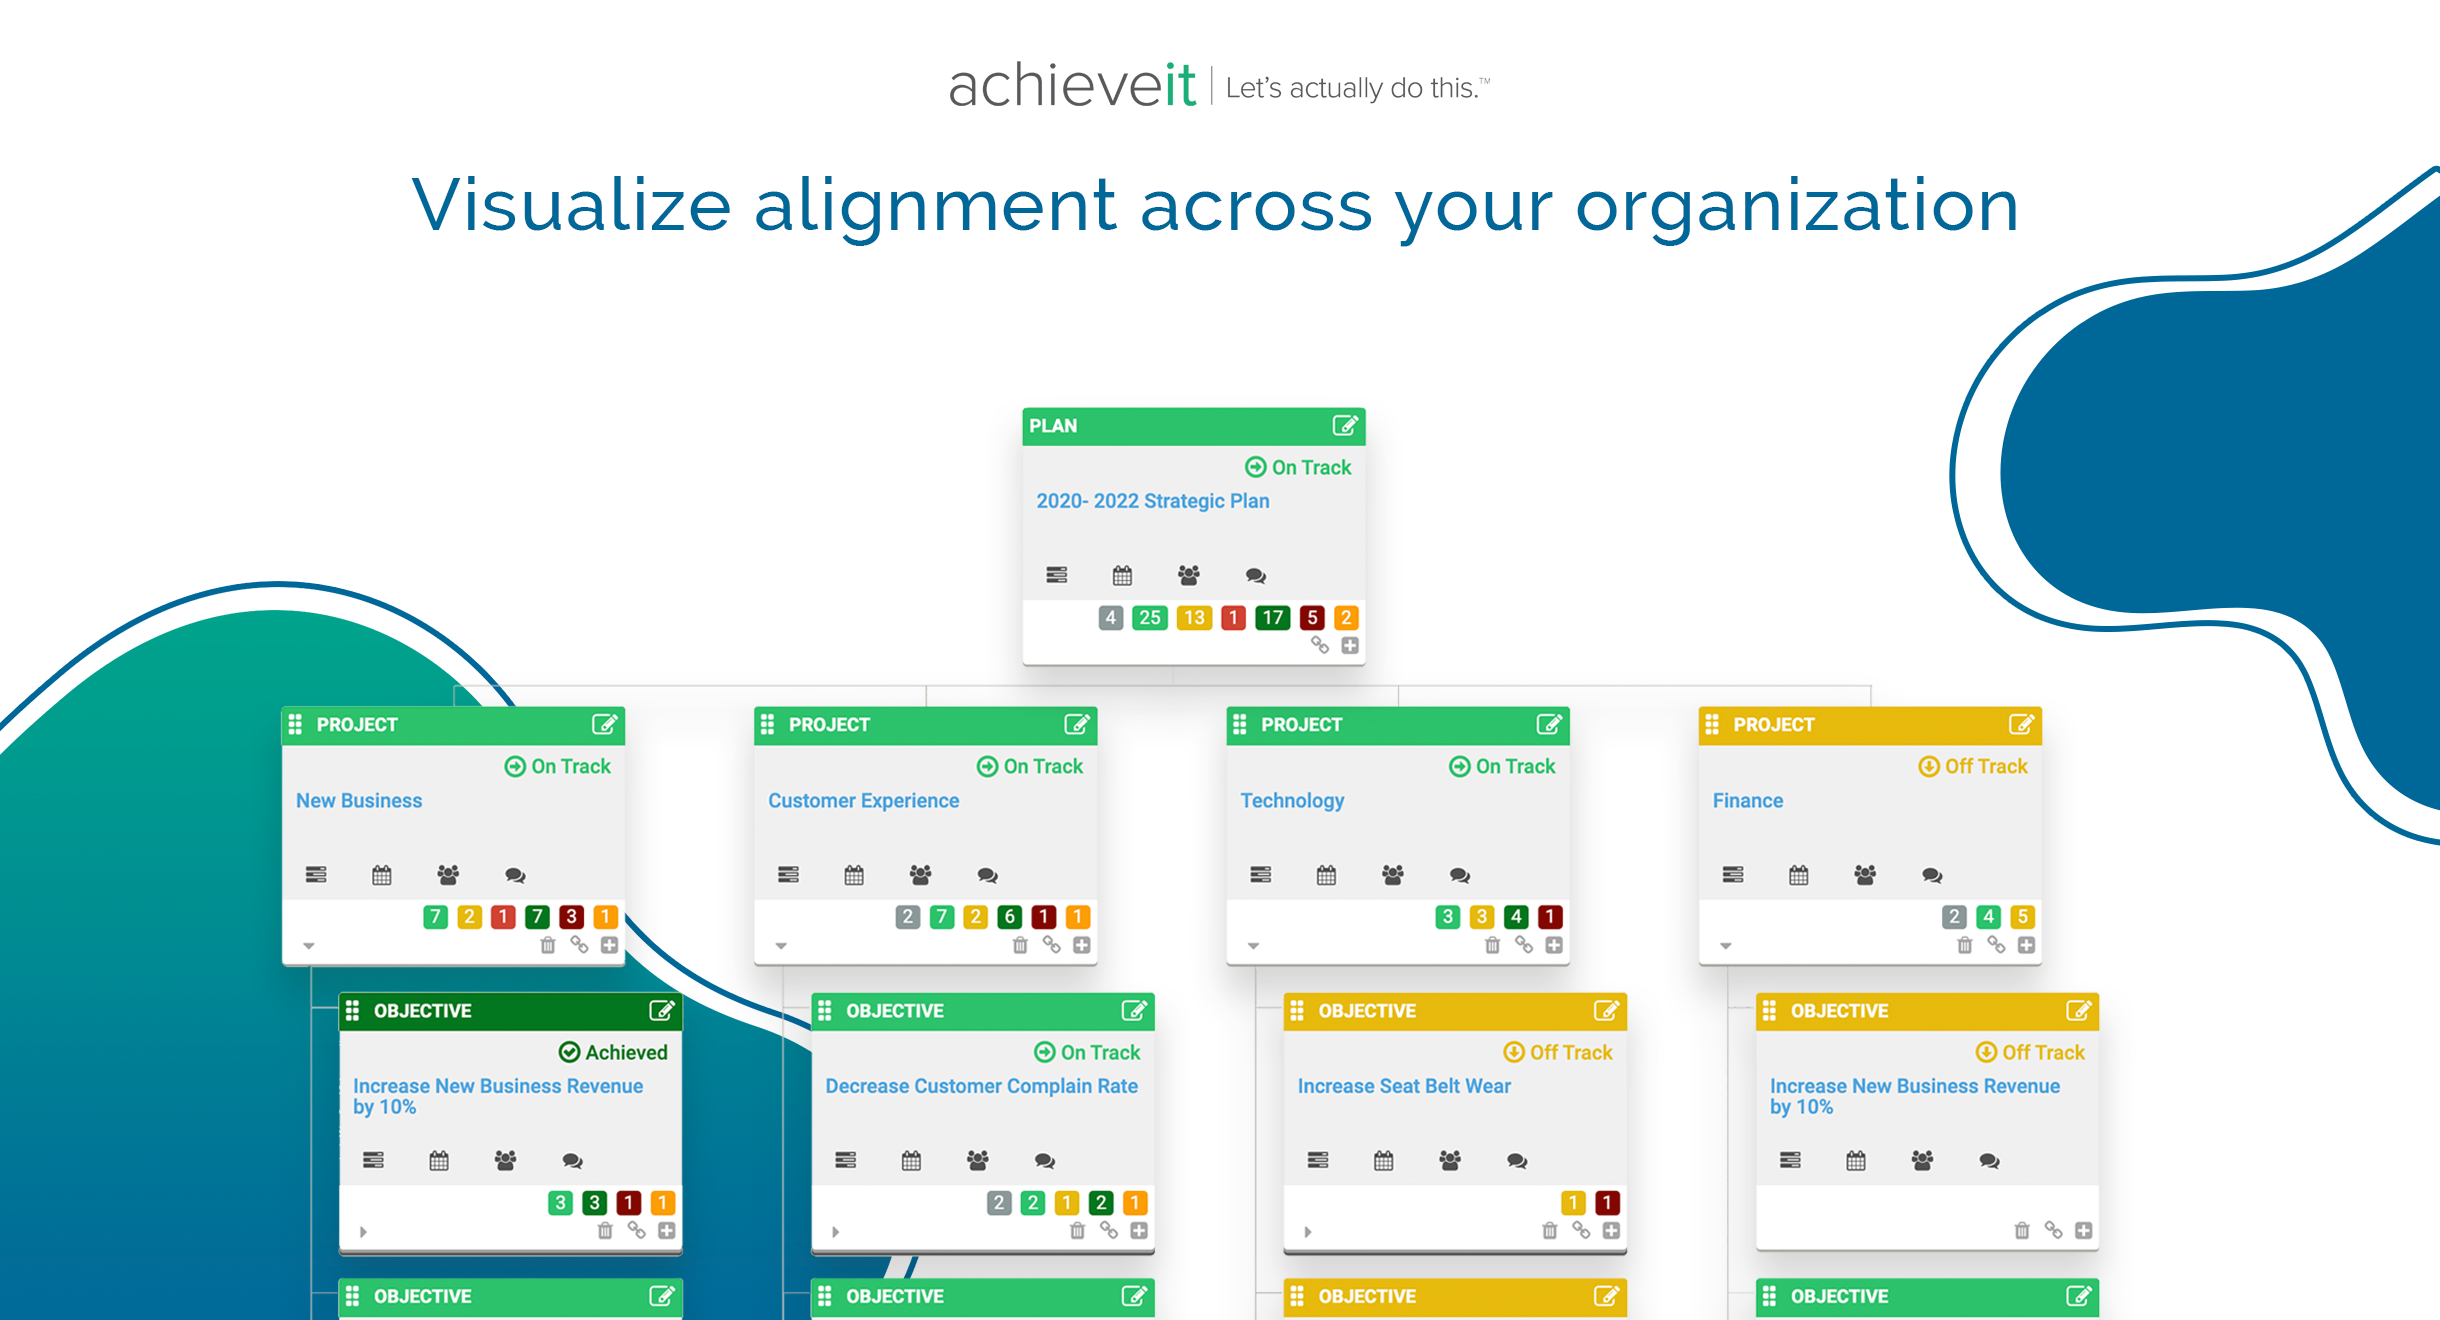 Visualize how your initiatives and resources connect across teams, so you can focus your effort and connect your team, regardless of your planning structure.